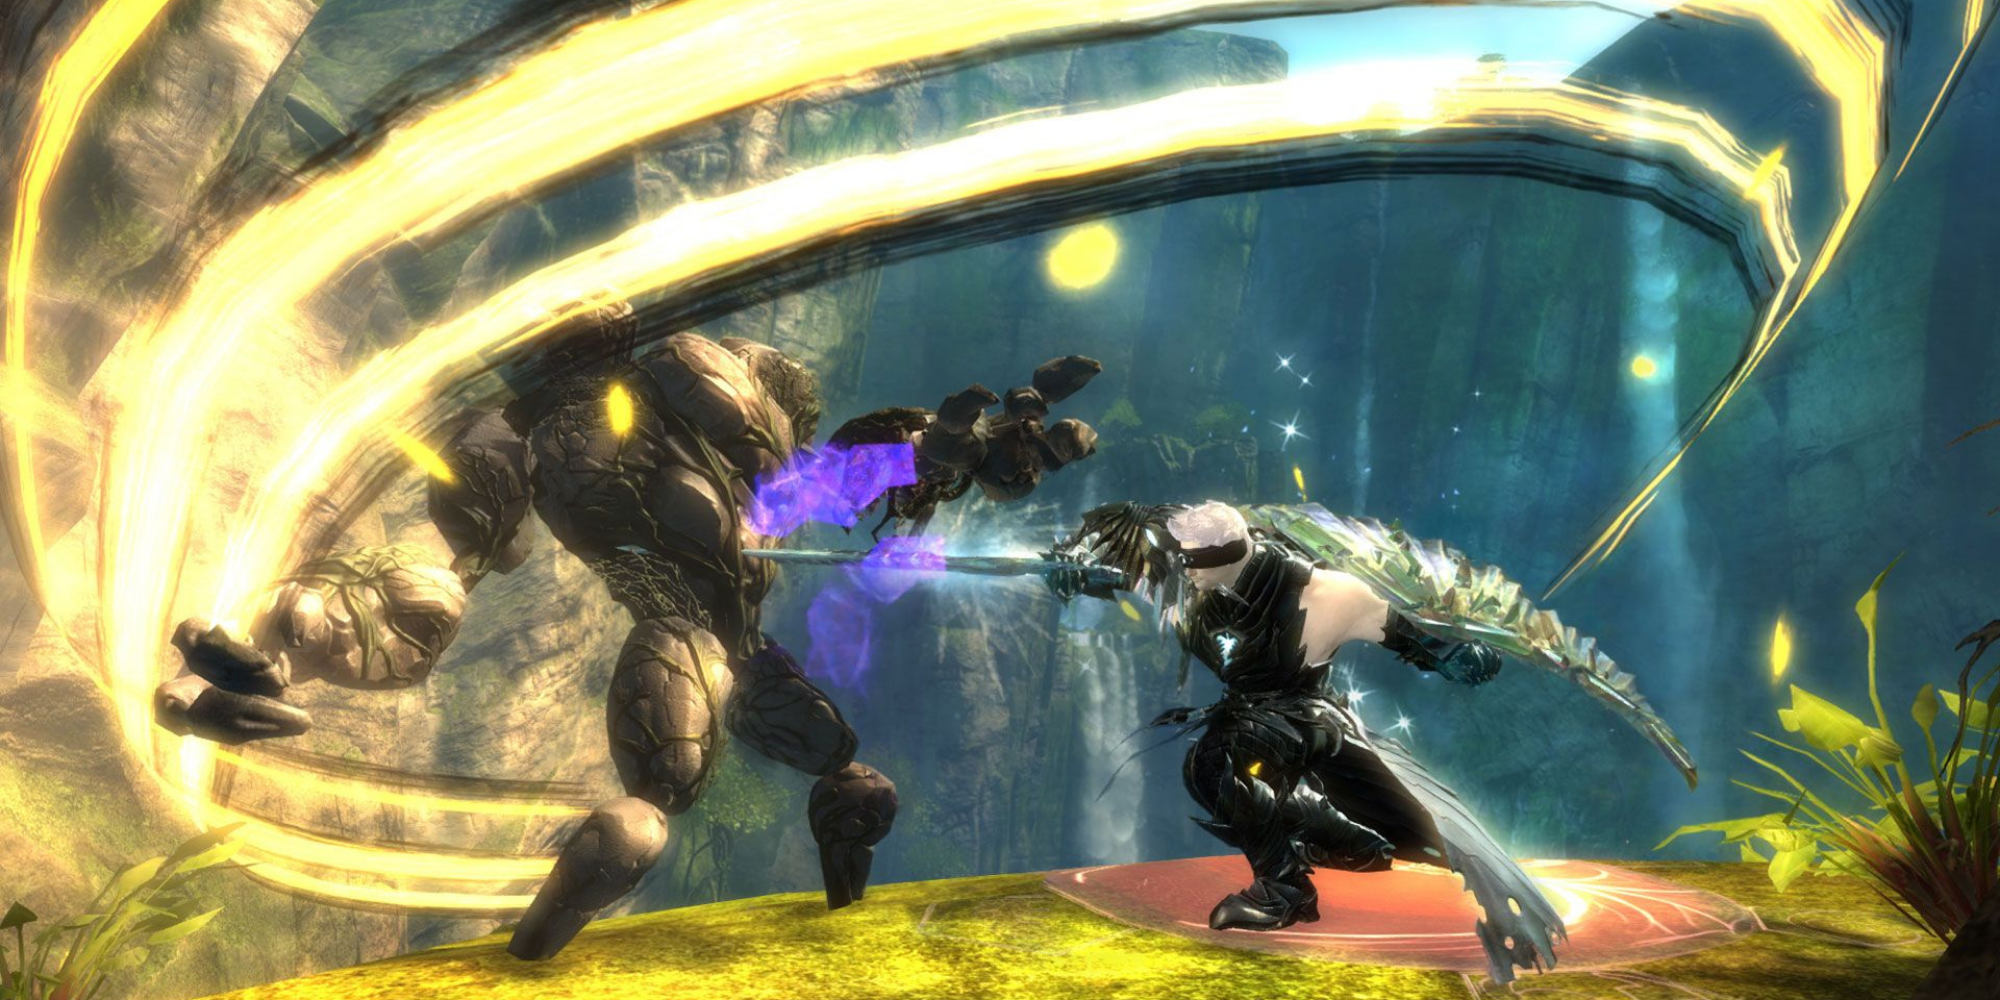 Guild Wars 2 - Revenant wielding a sword and a shield, attacking a golem